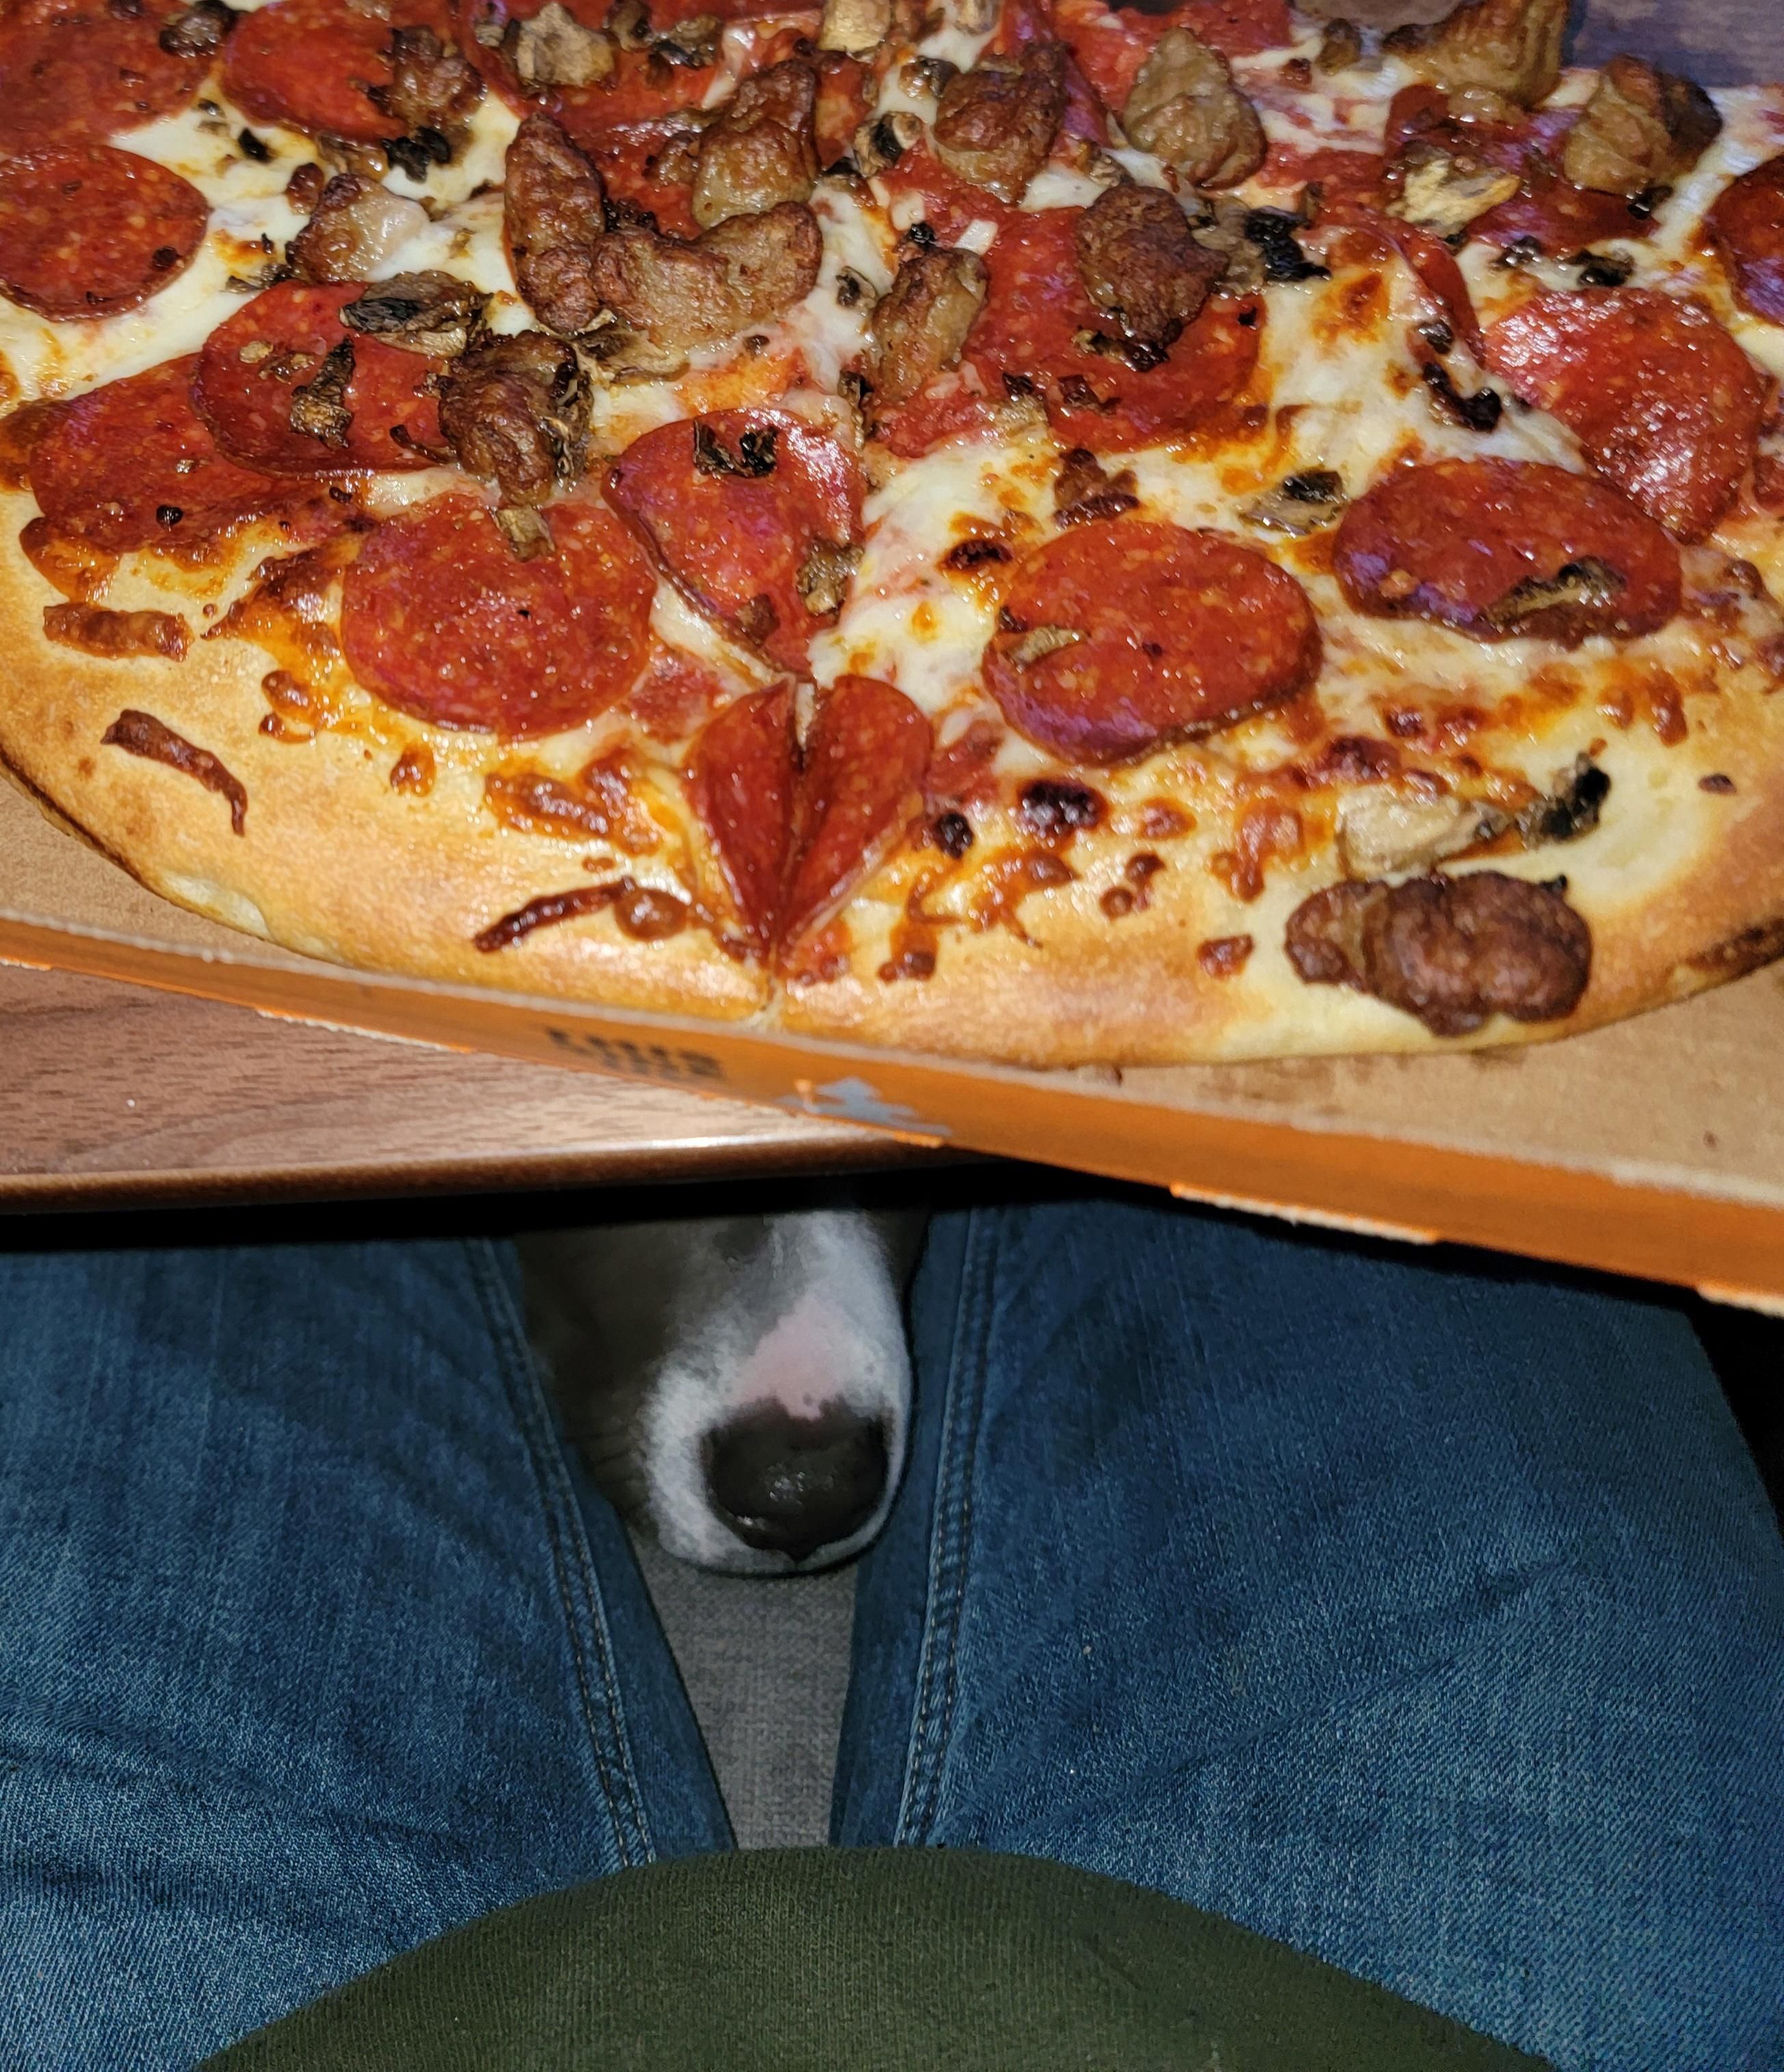 Waiting on that one piece of stray sausage to fall off a slice.